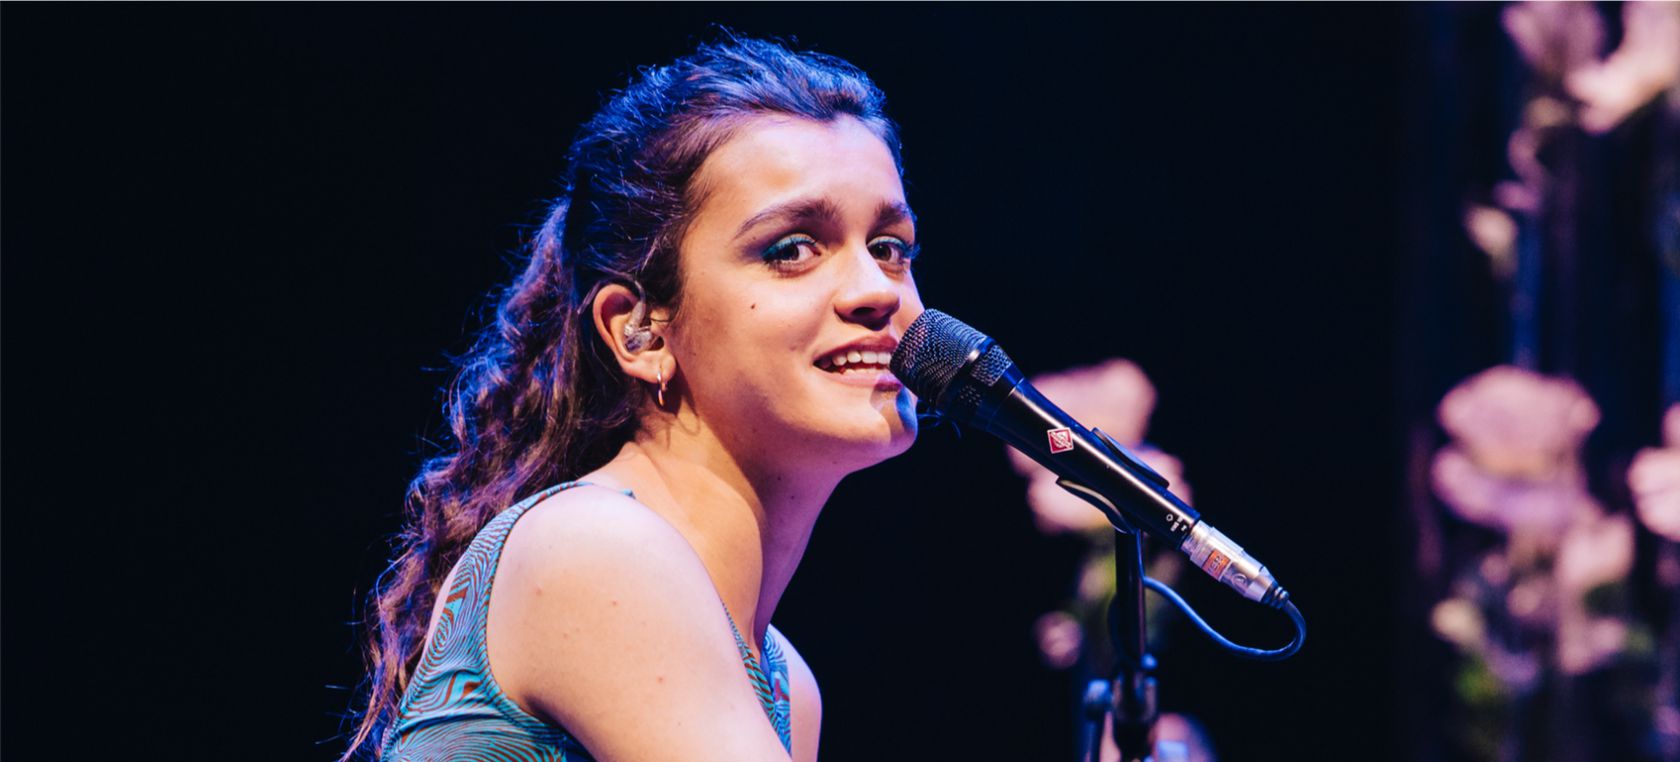 Amaia will release her new album next friday 